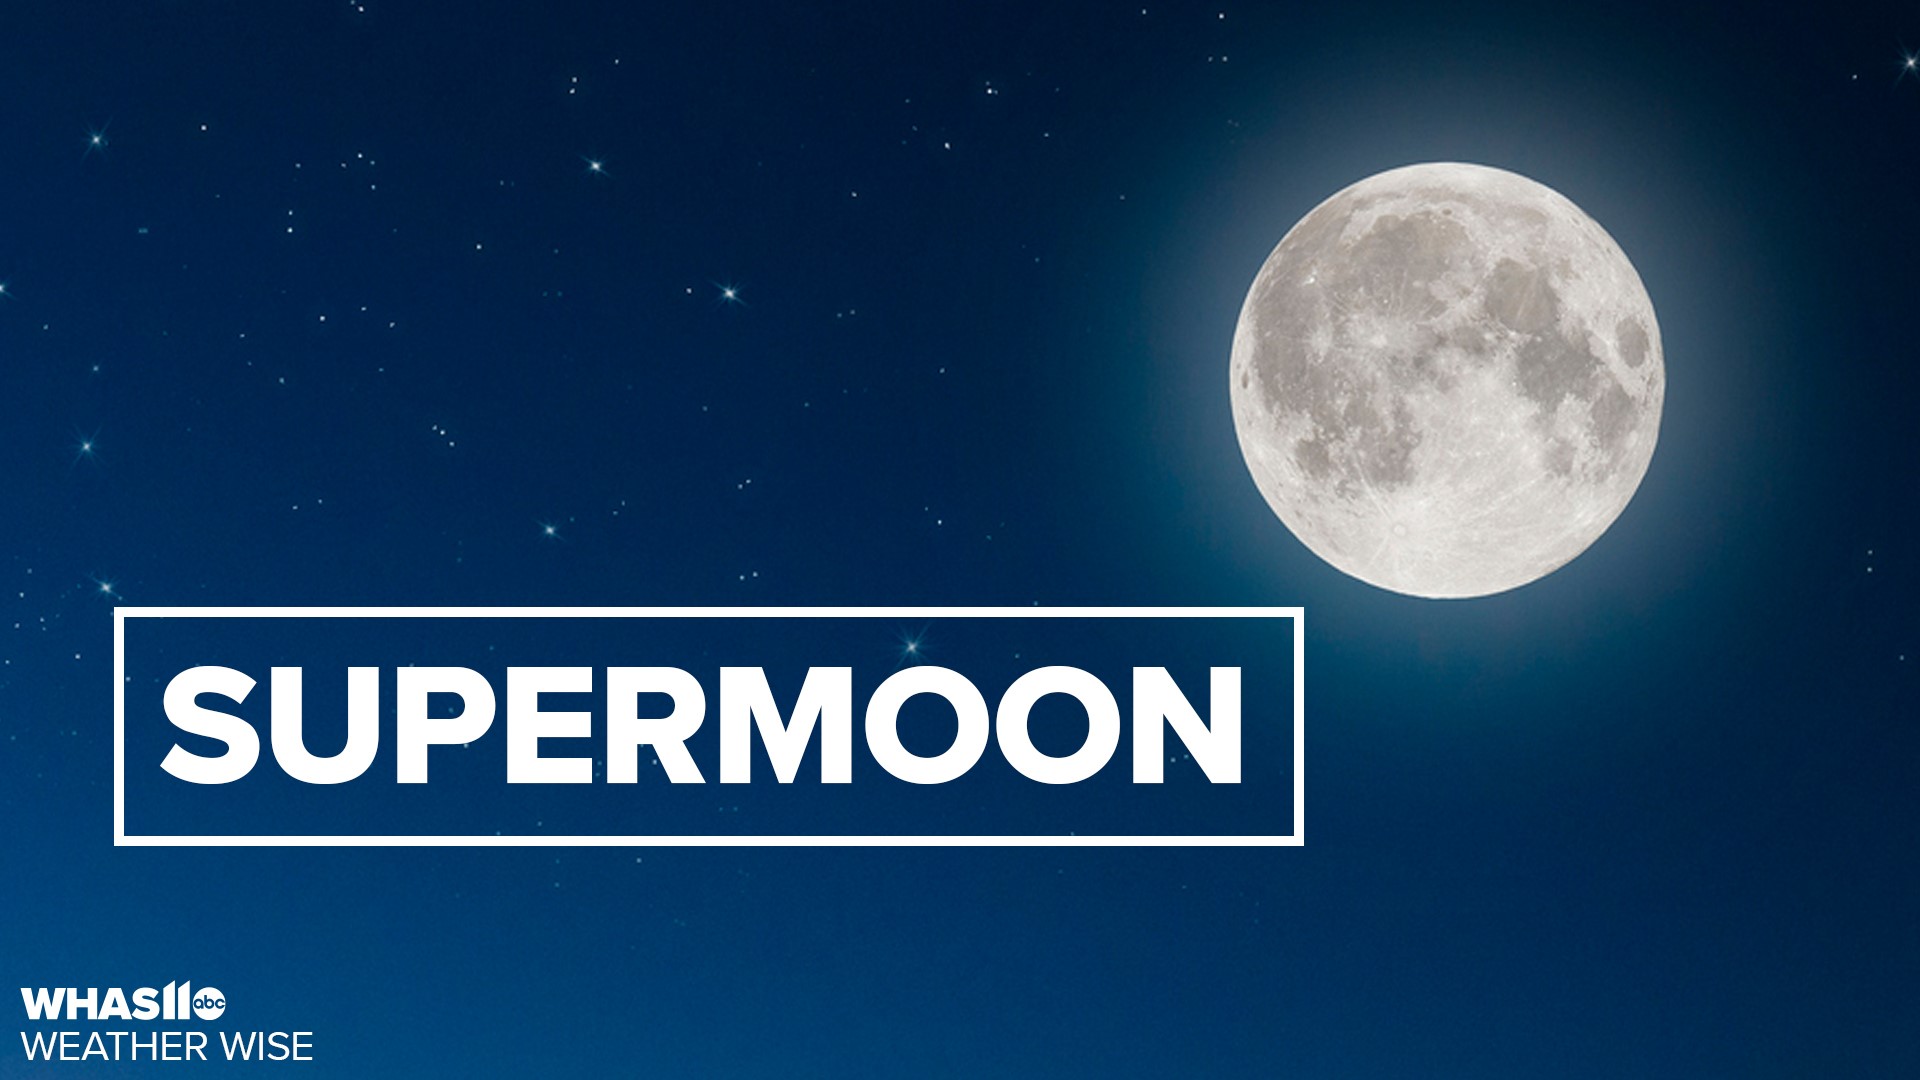 A supermoon is where the moon appears bigger and brighter. It can happen up to a couple times a year.